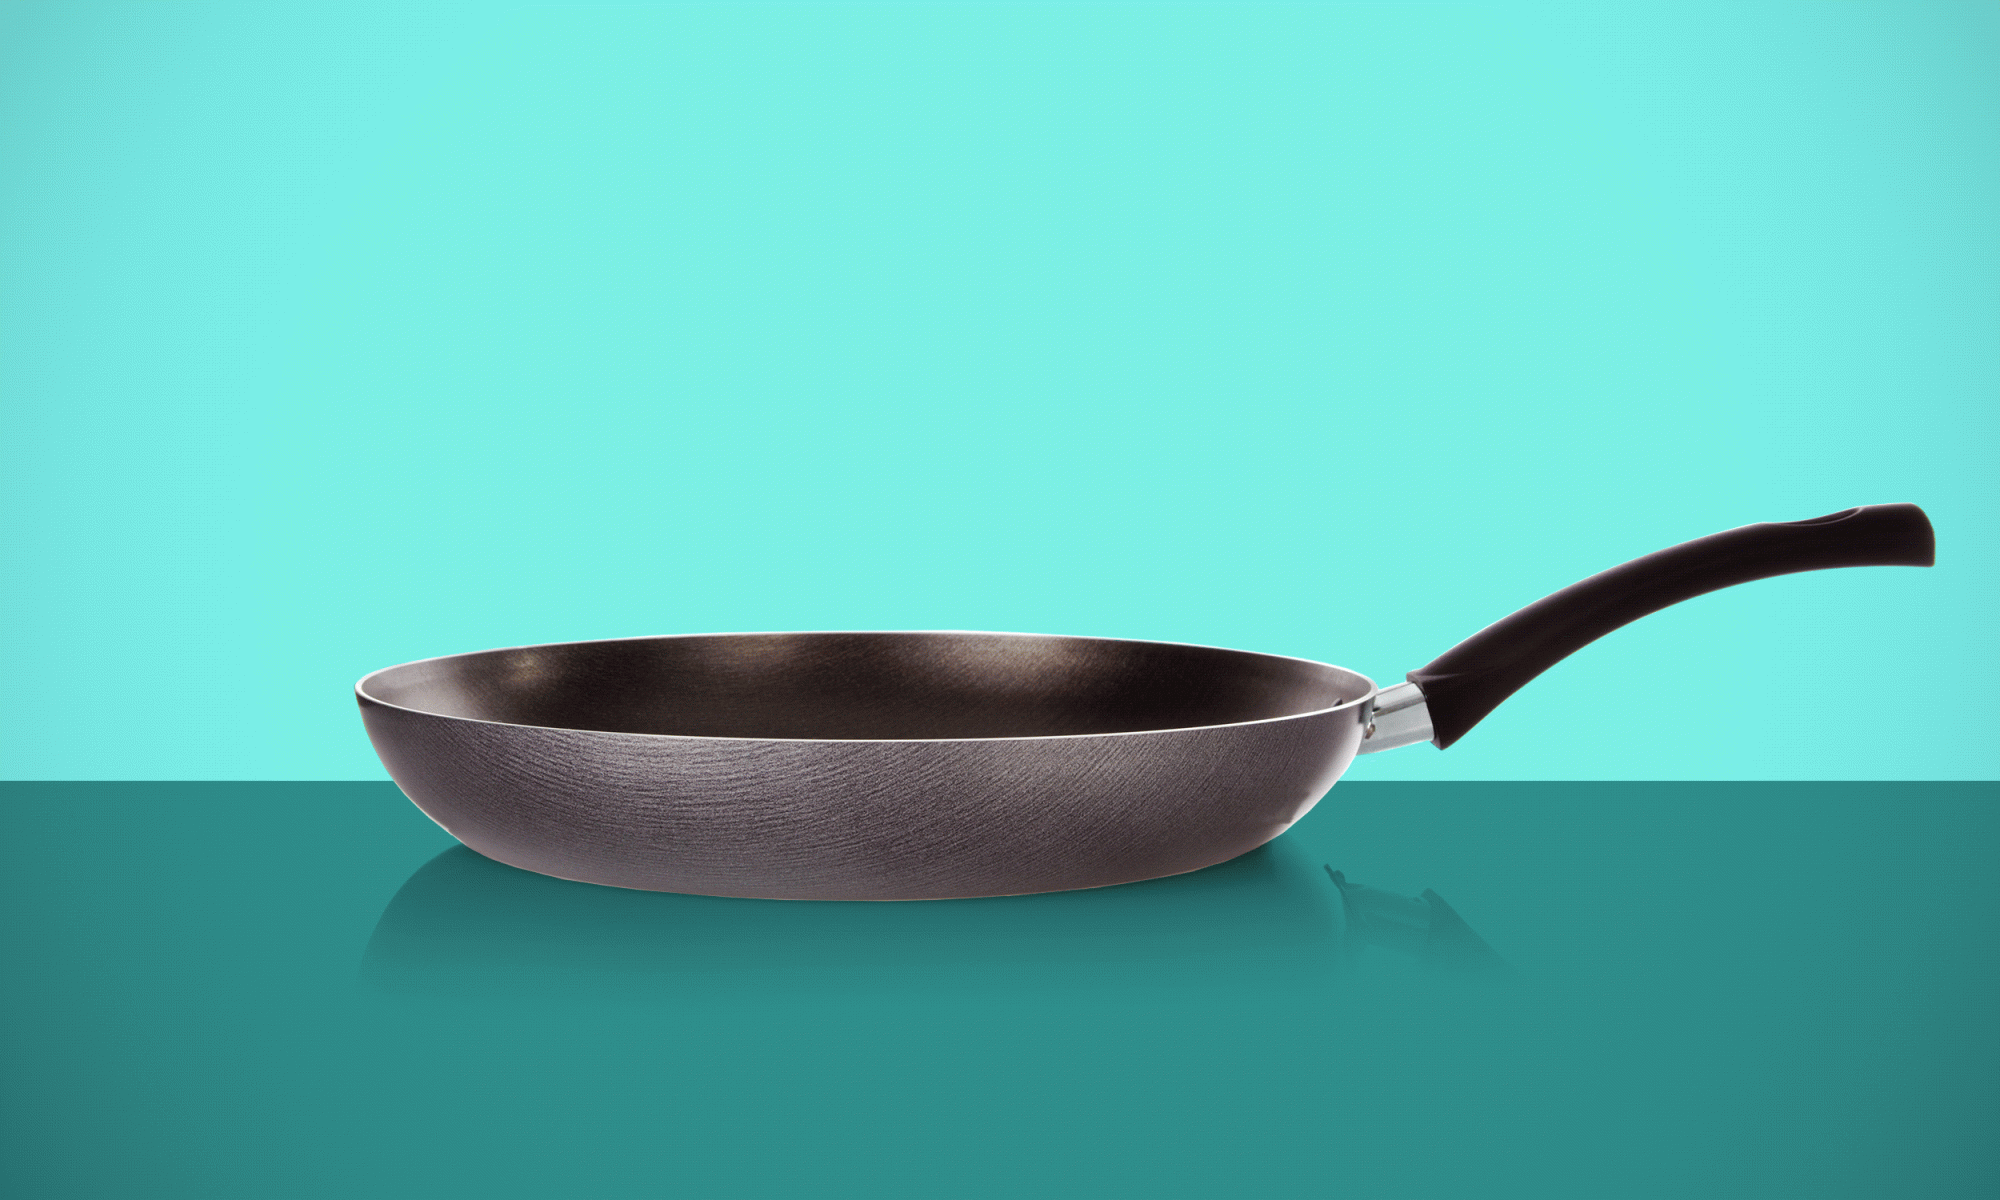 How to Protect Skillet Handles in a Hot Oven